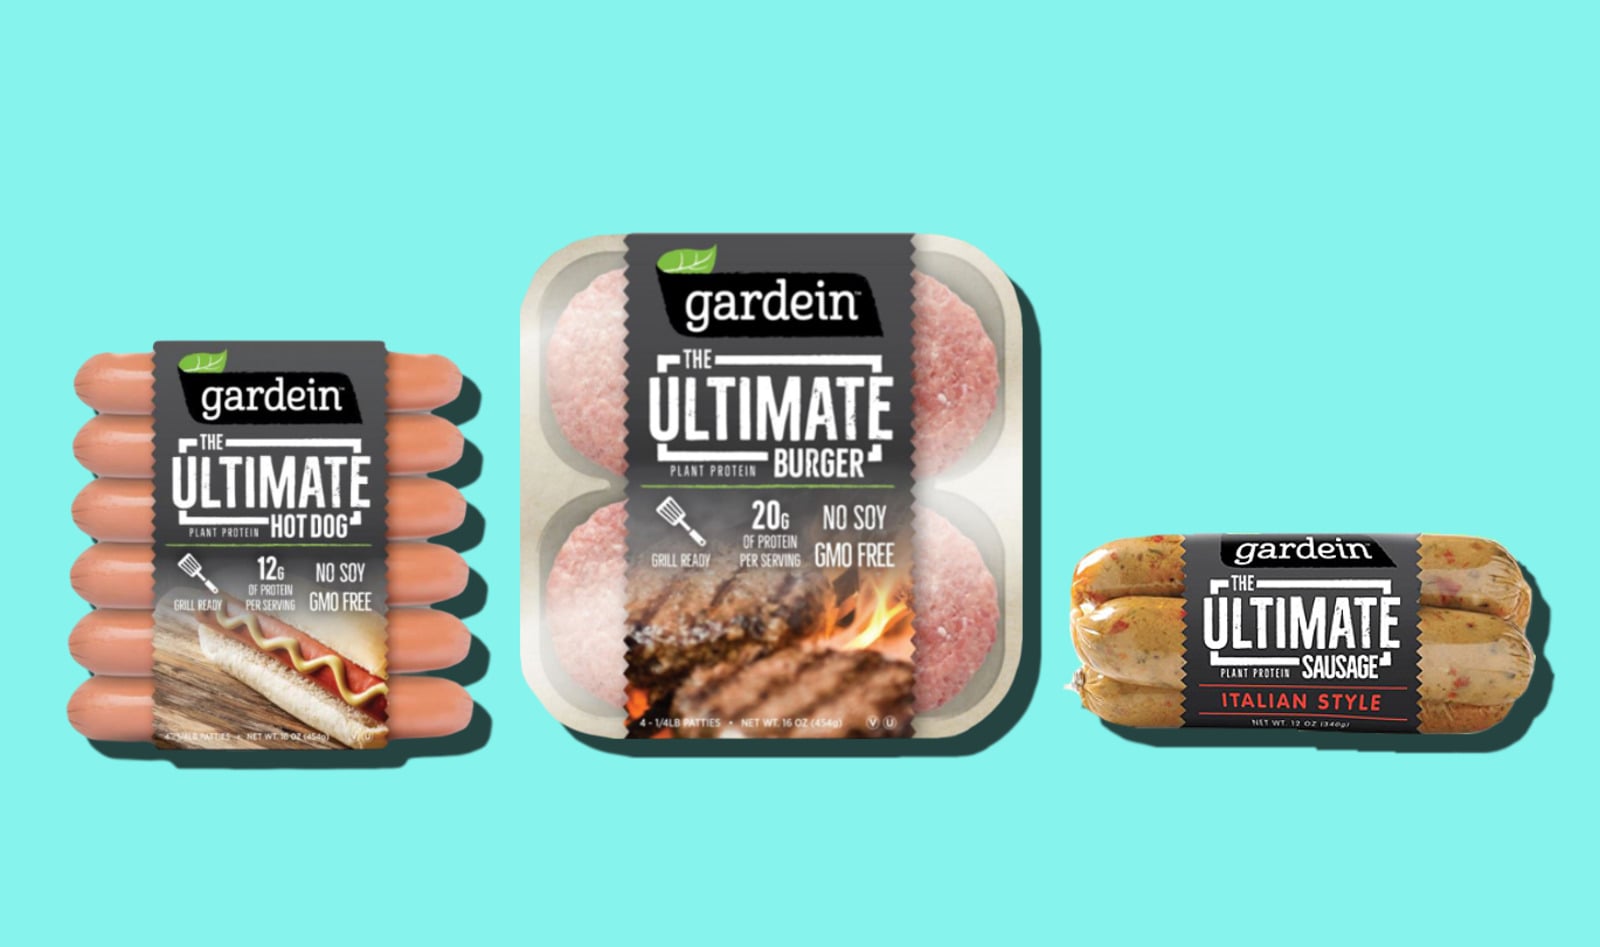 Gardein’s Next-Generation Vegan Sausages and Burgers Are on the Way